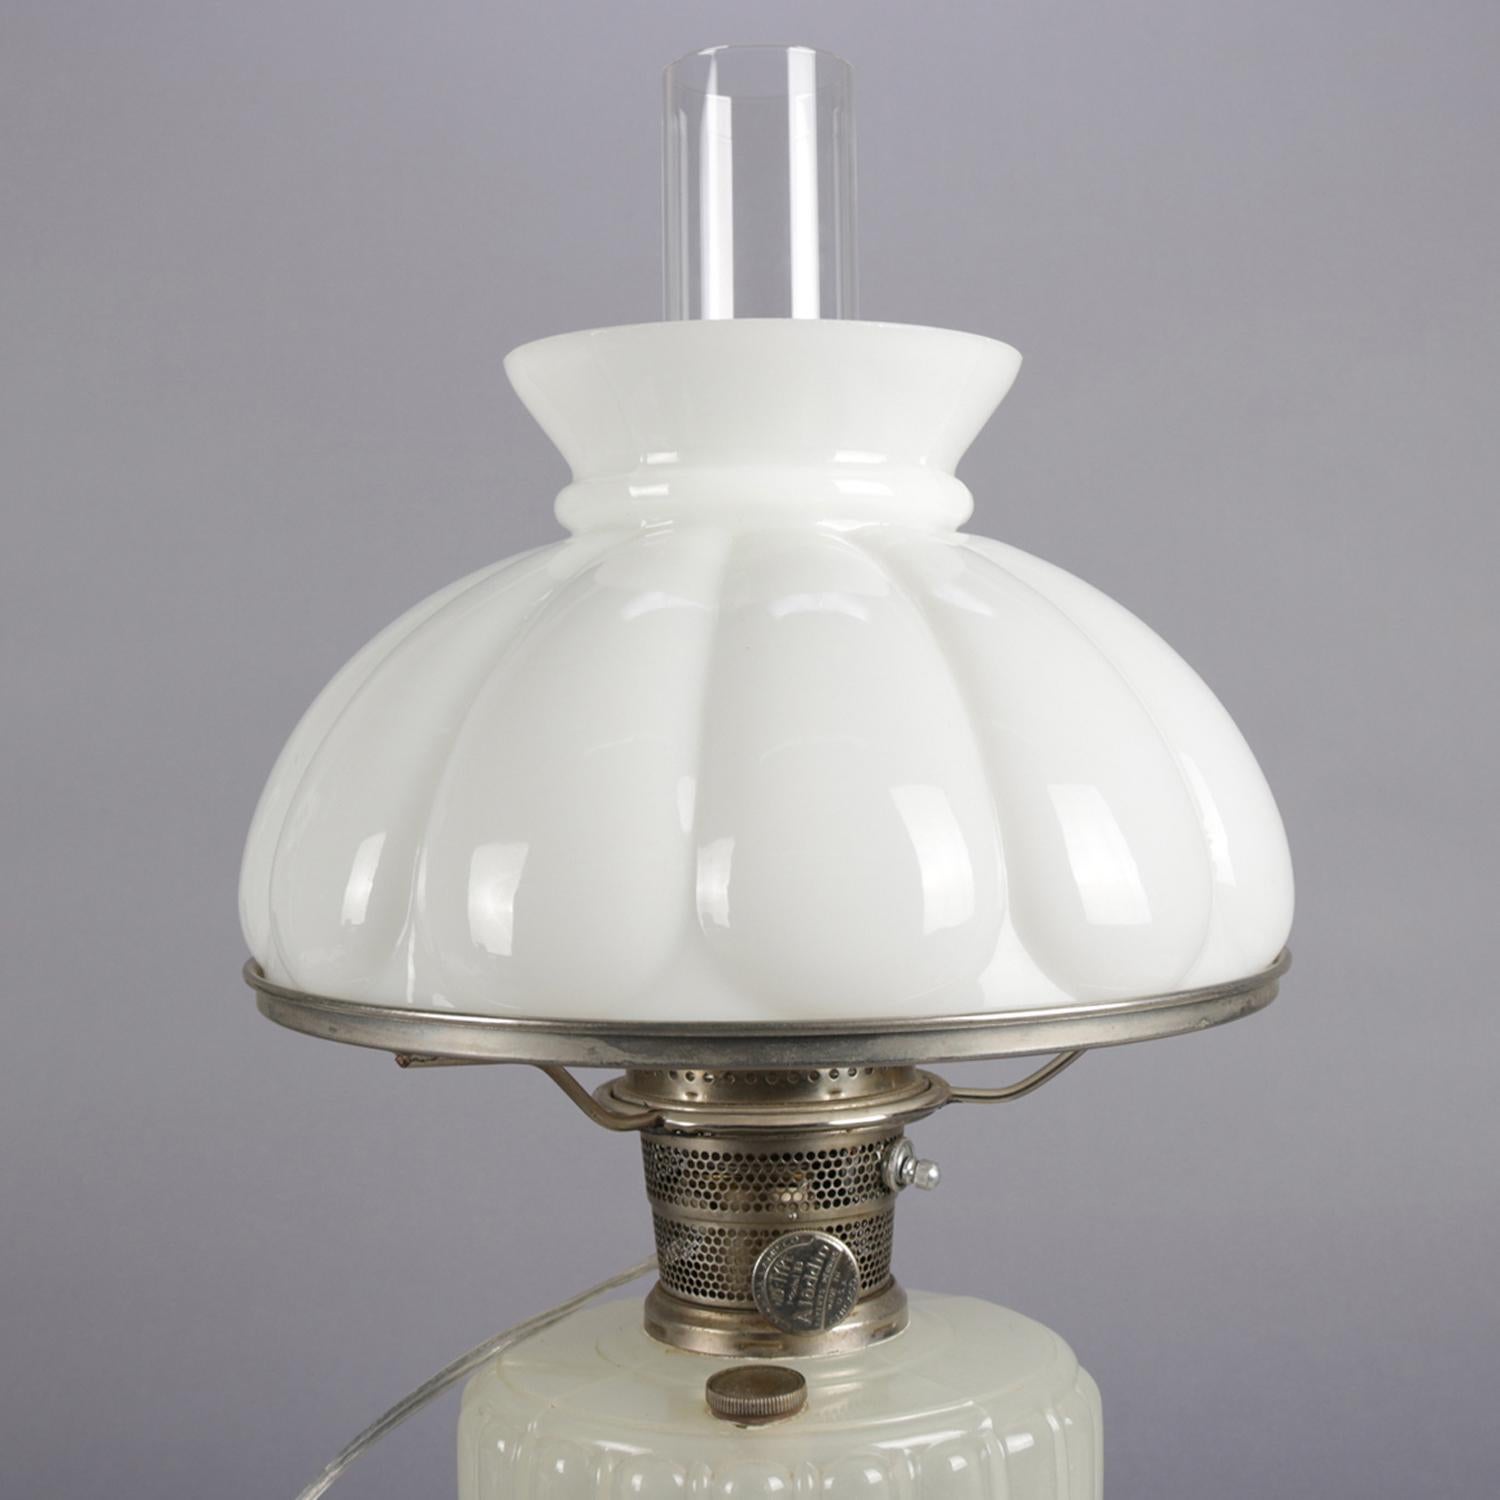 American Antique Clambroth Glass Pedestal Electrified Table Lamp by Aladdin Co.